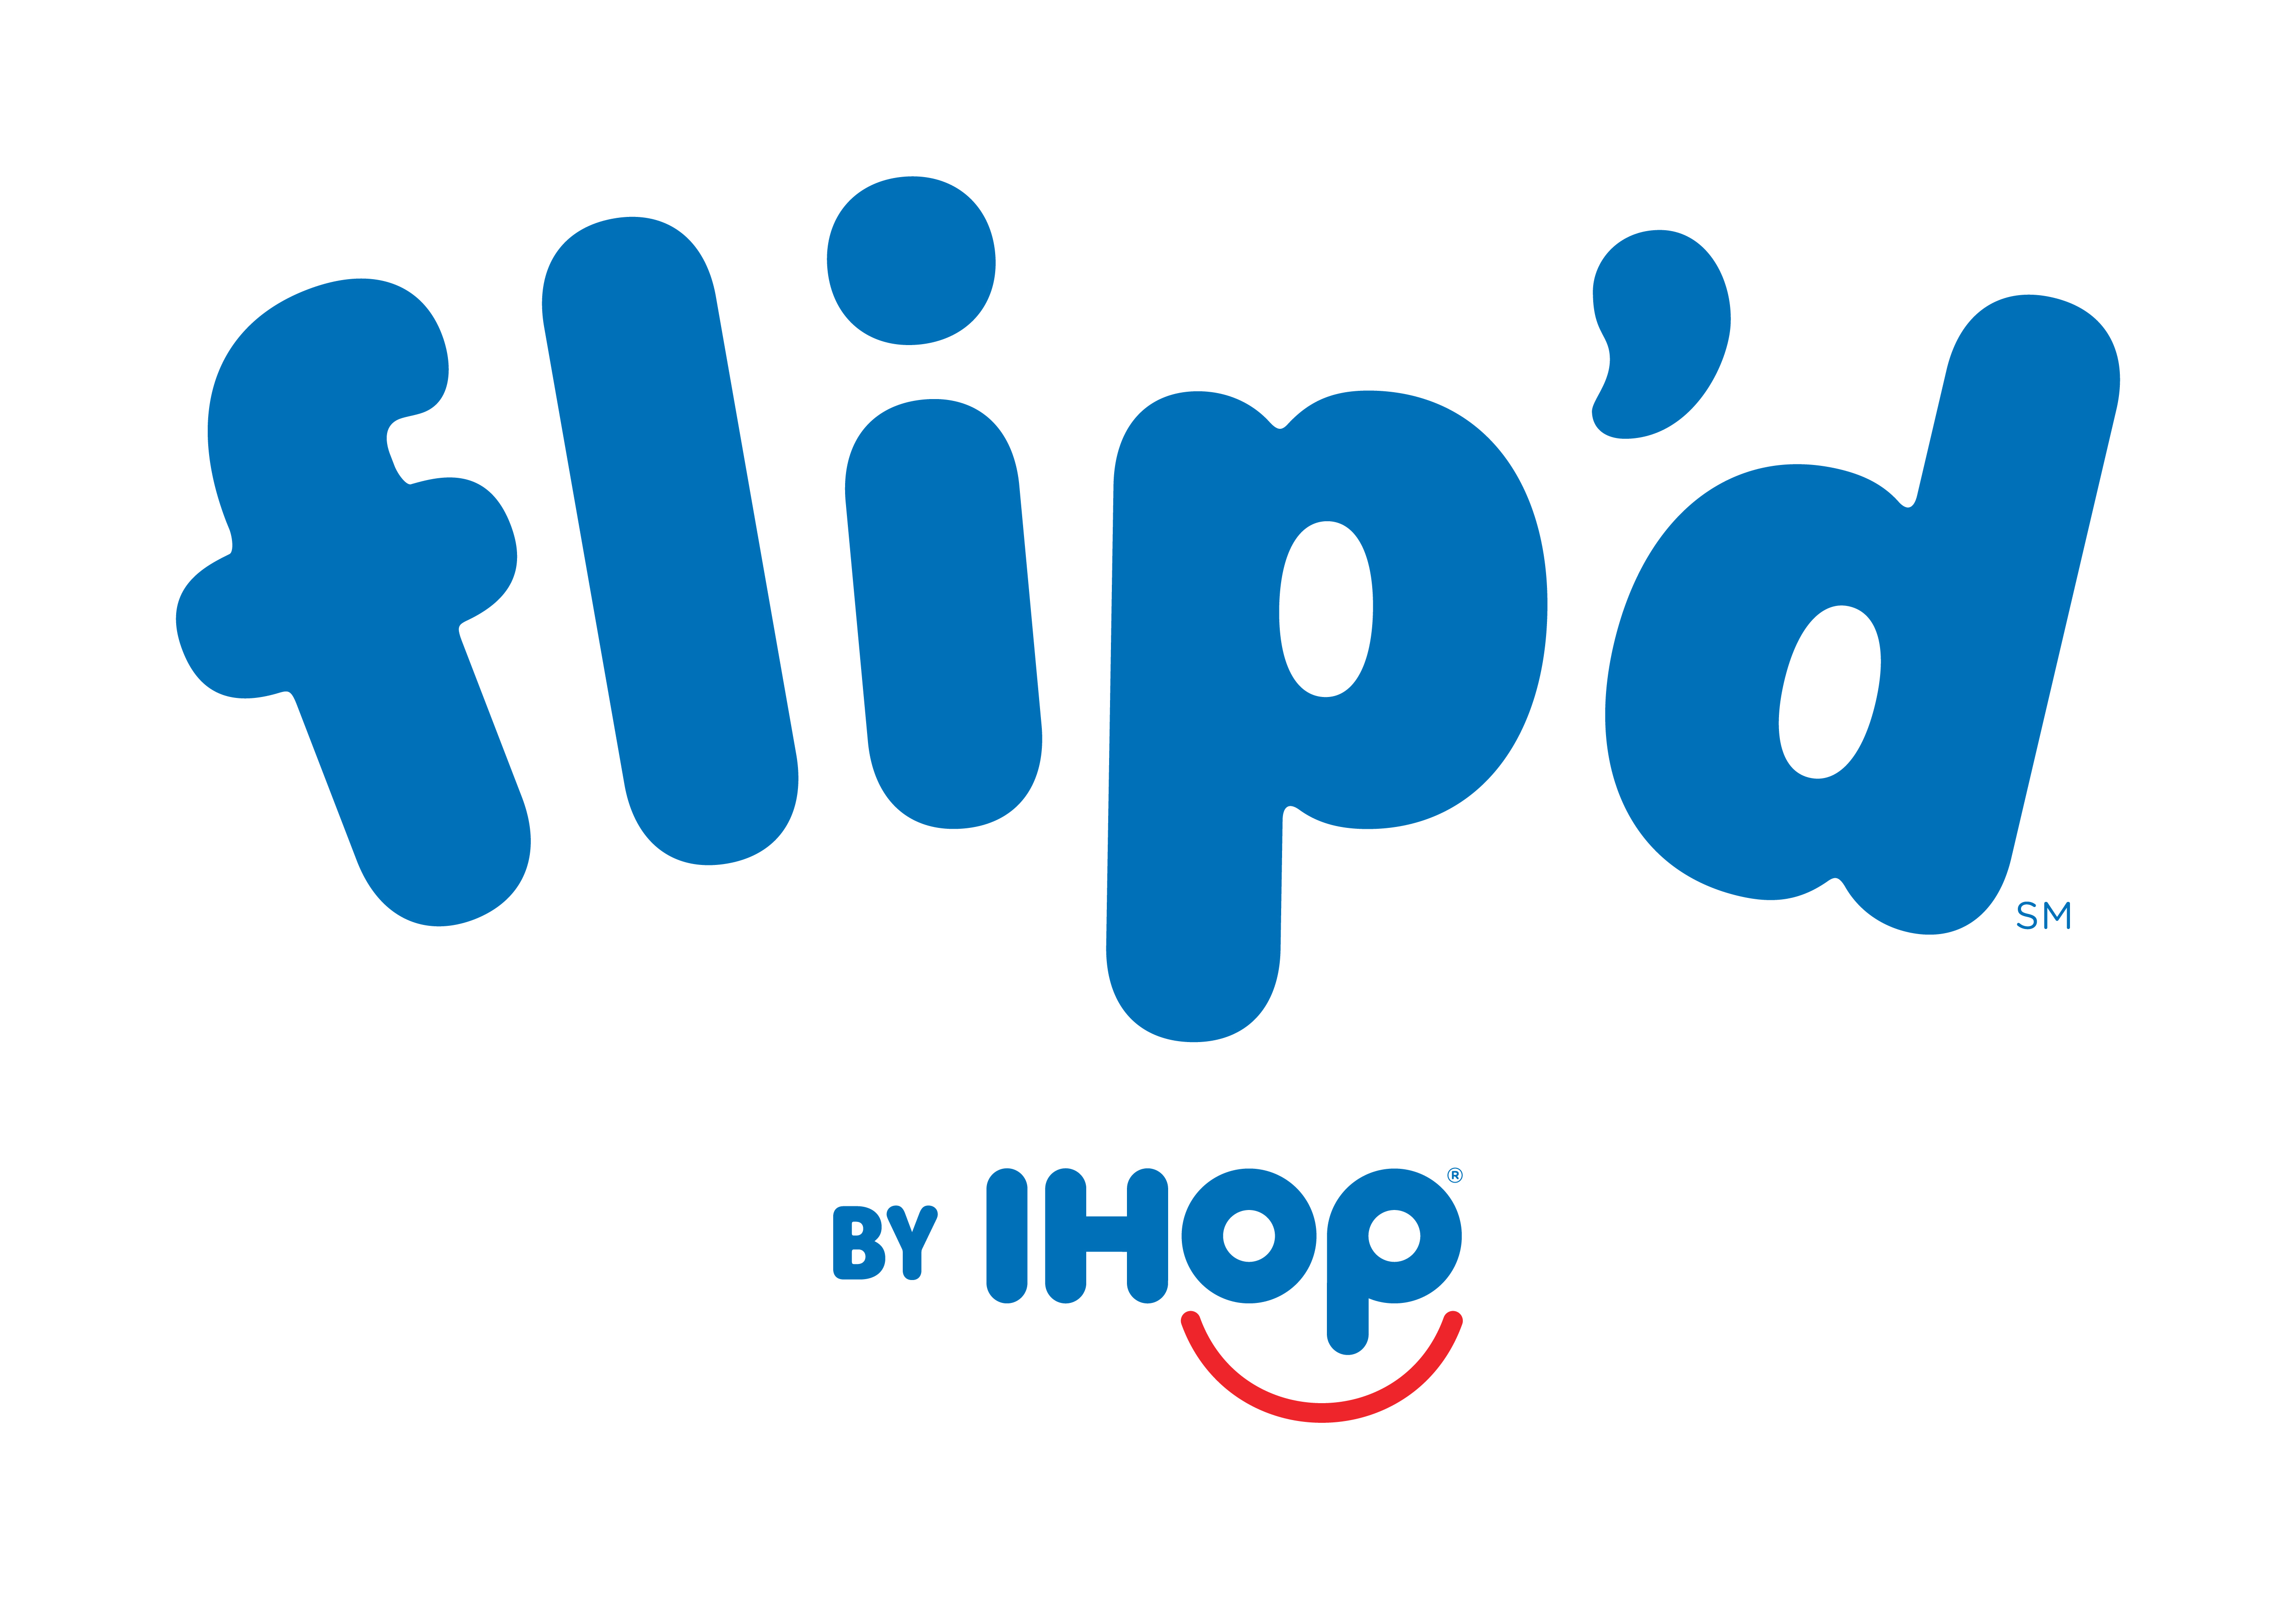 Flip'd, IHOP's Fast-Casual Concept, Opens Its First New York City